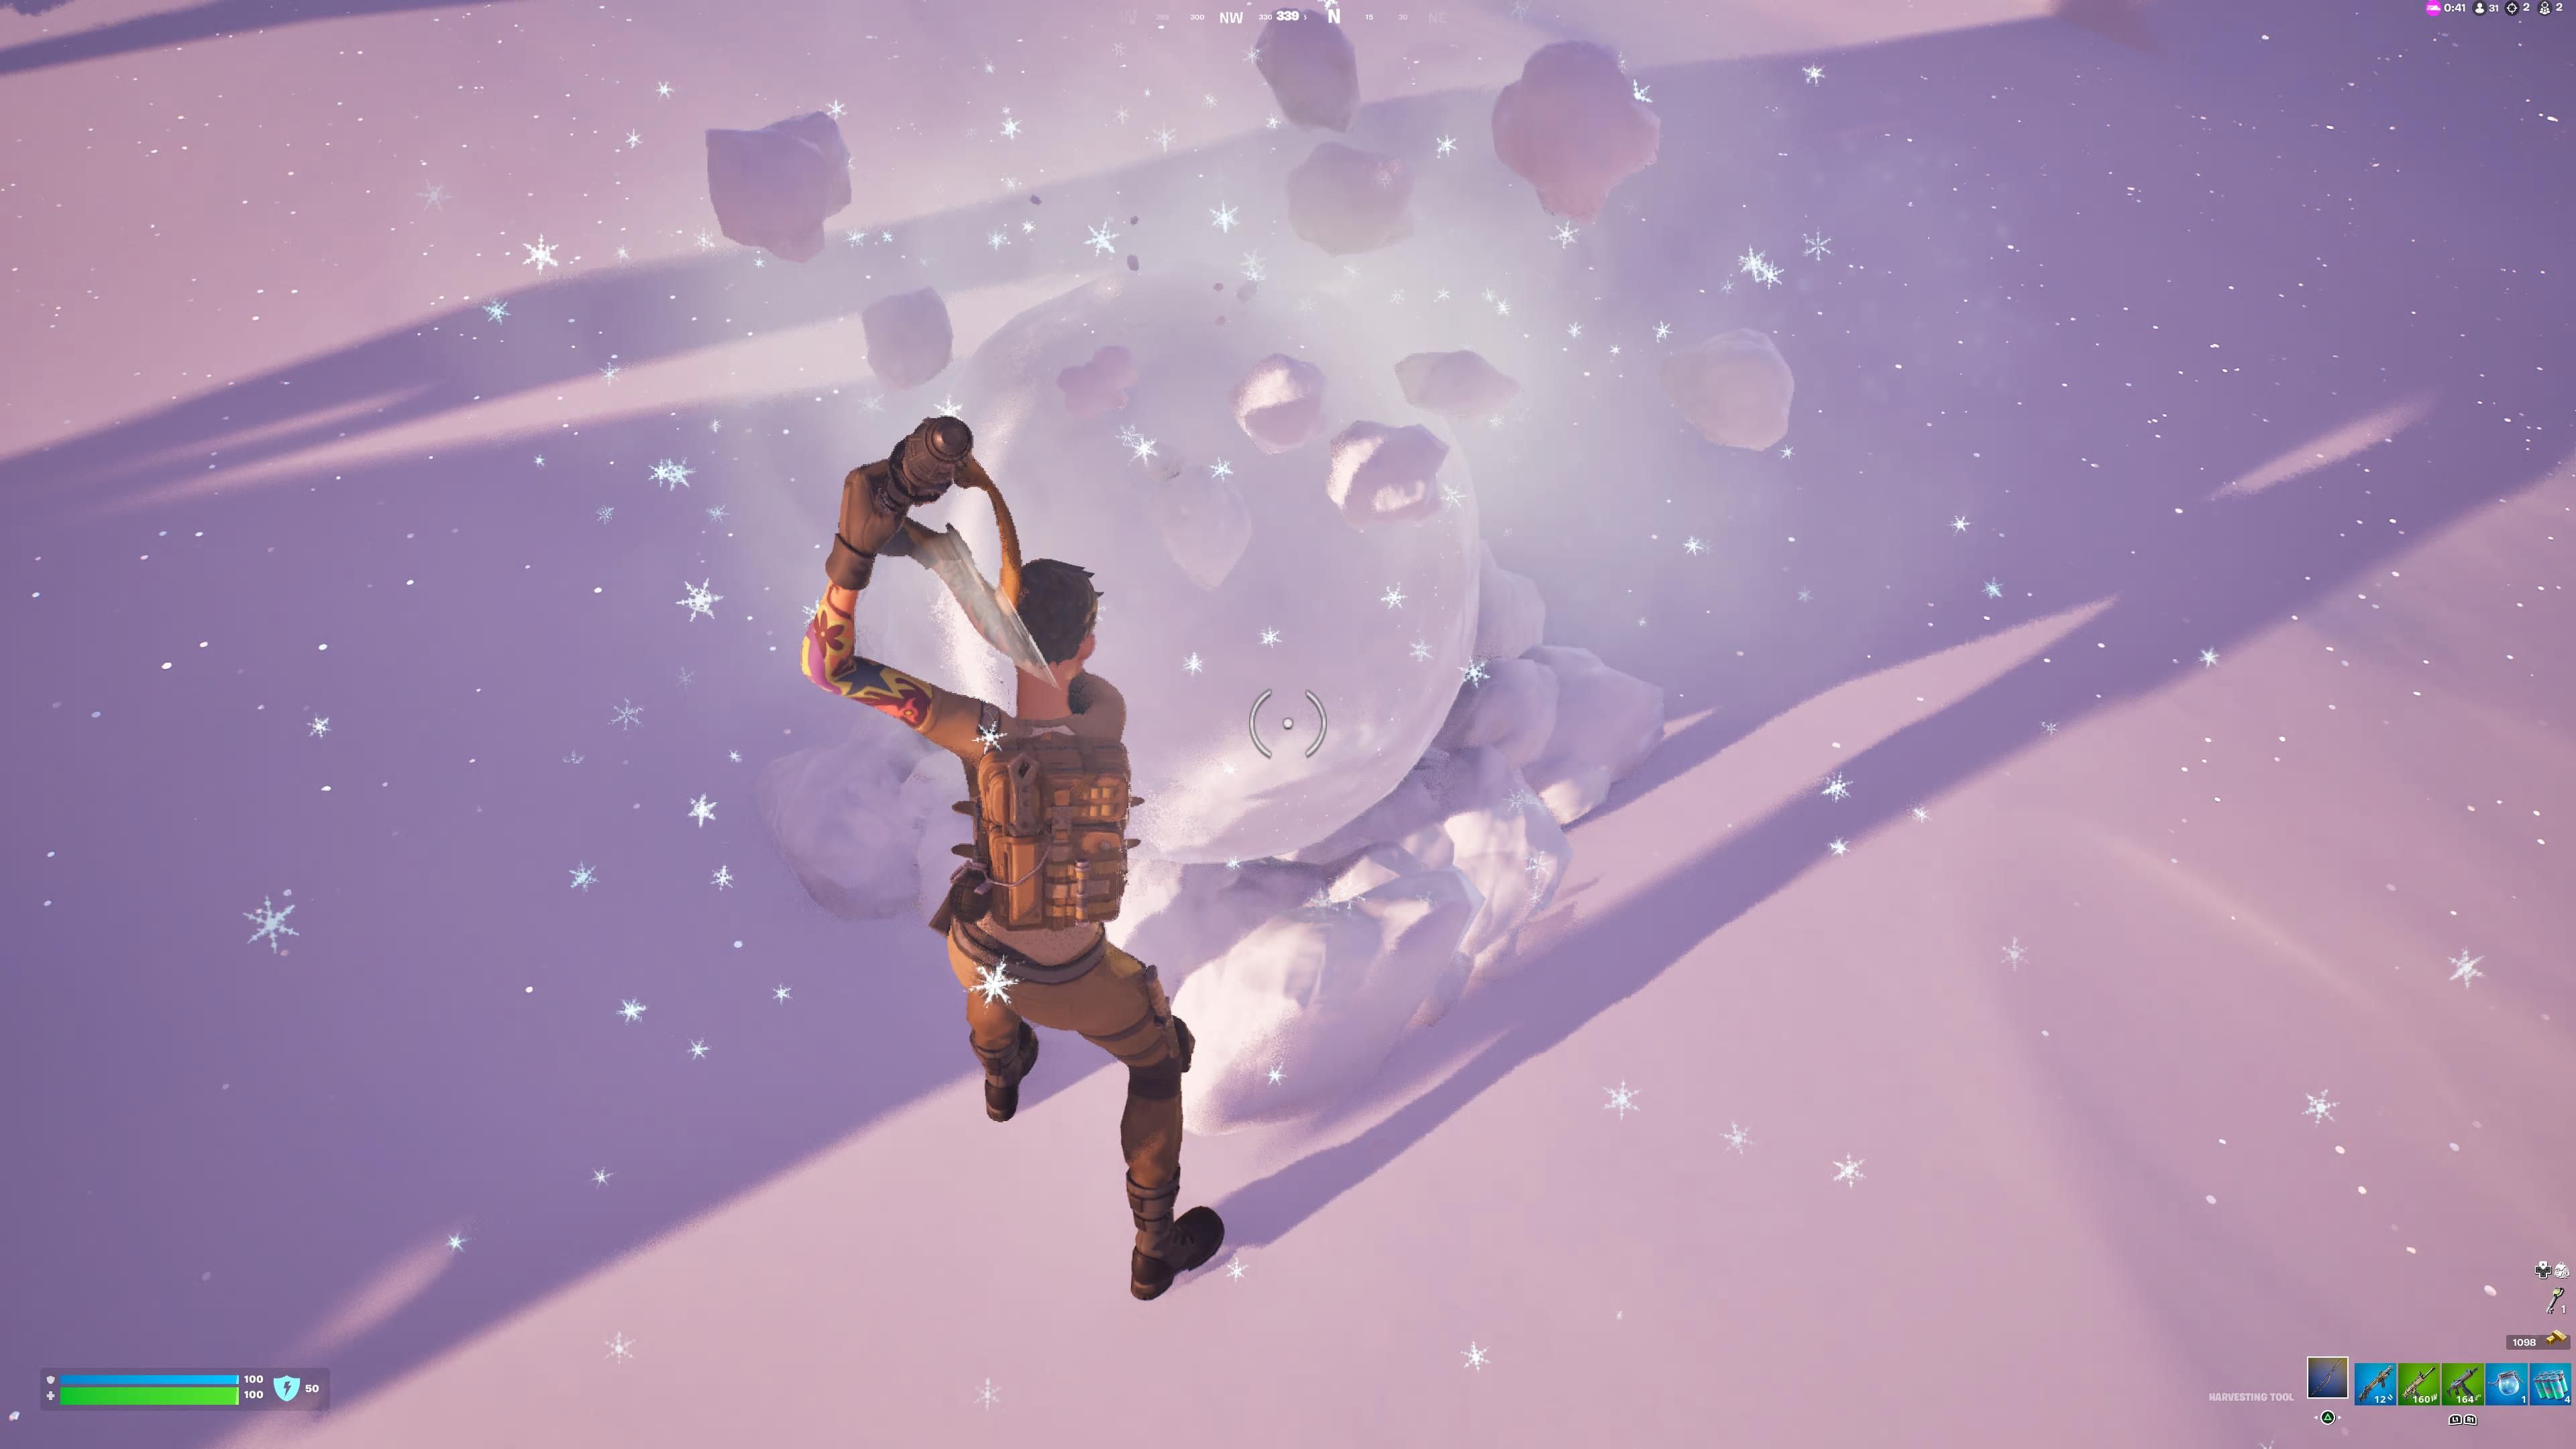 Fortnite Chapter 4 Season 1 Players Hitting Snow With Harvesting Tool To Build Giant Snowball